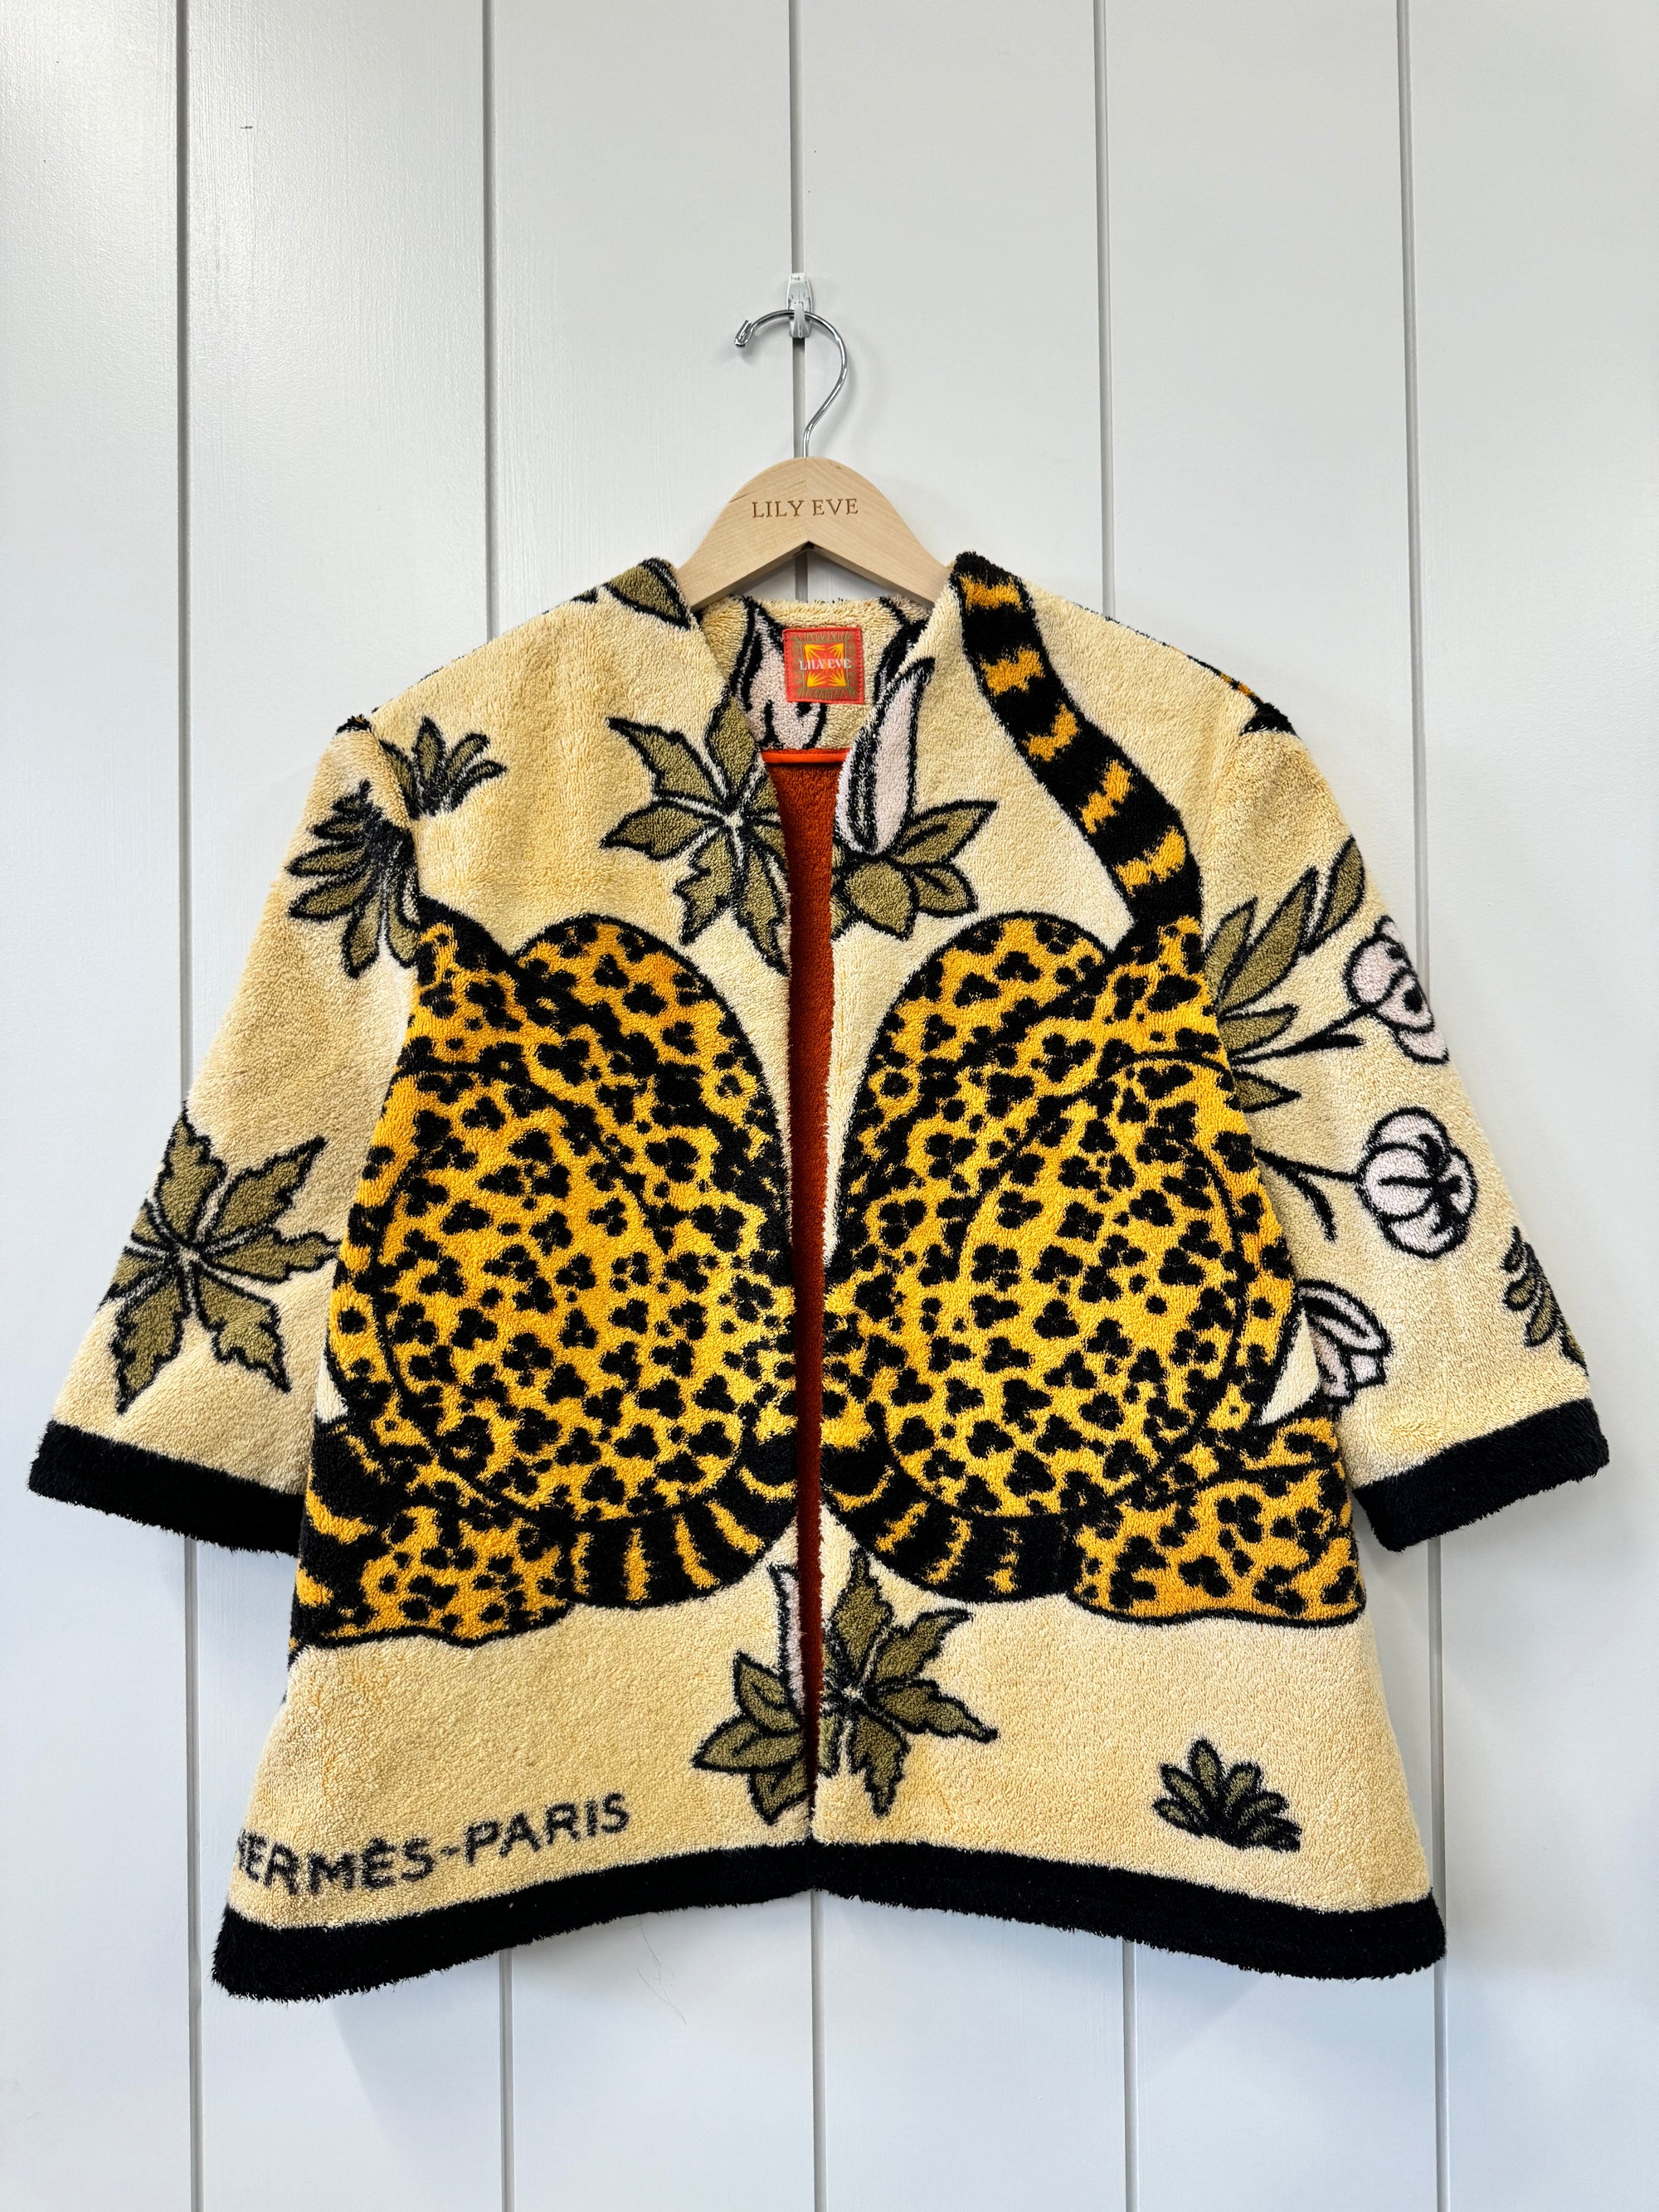 The Yellow Leopard Jacket